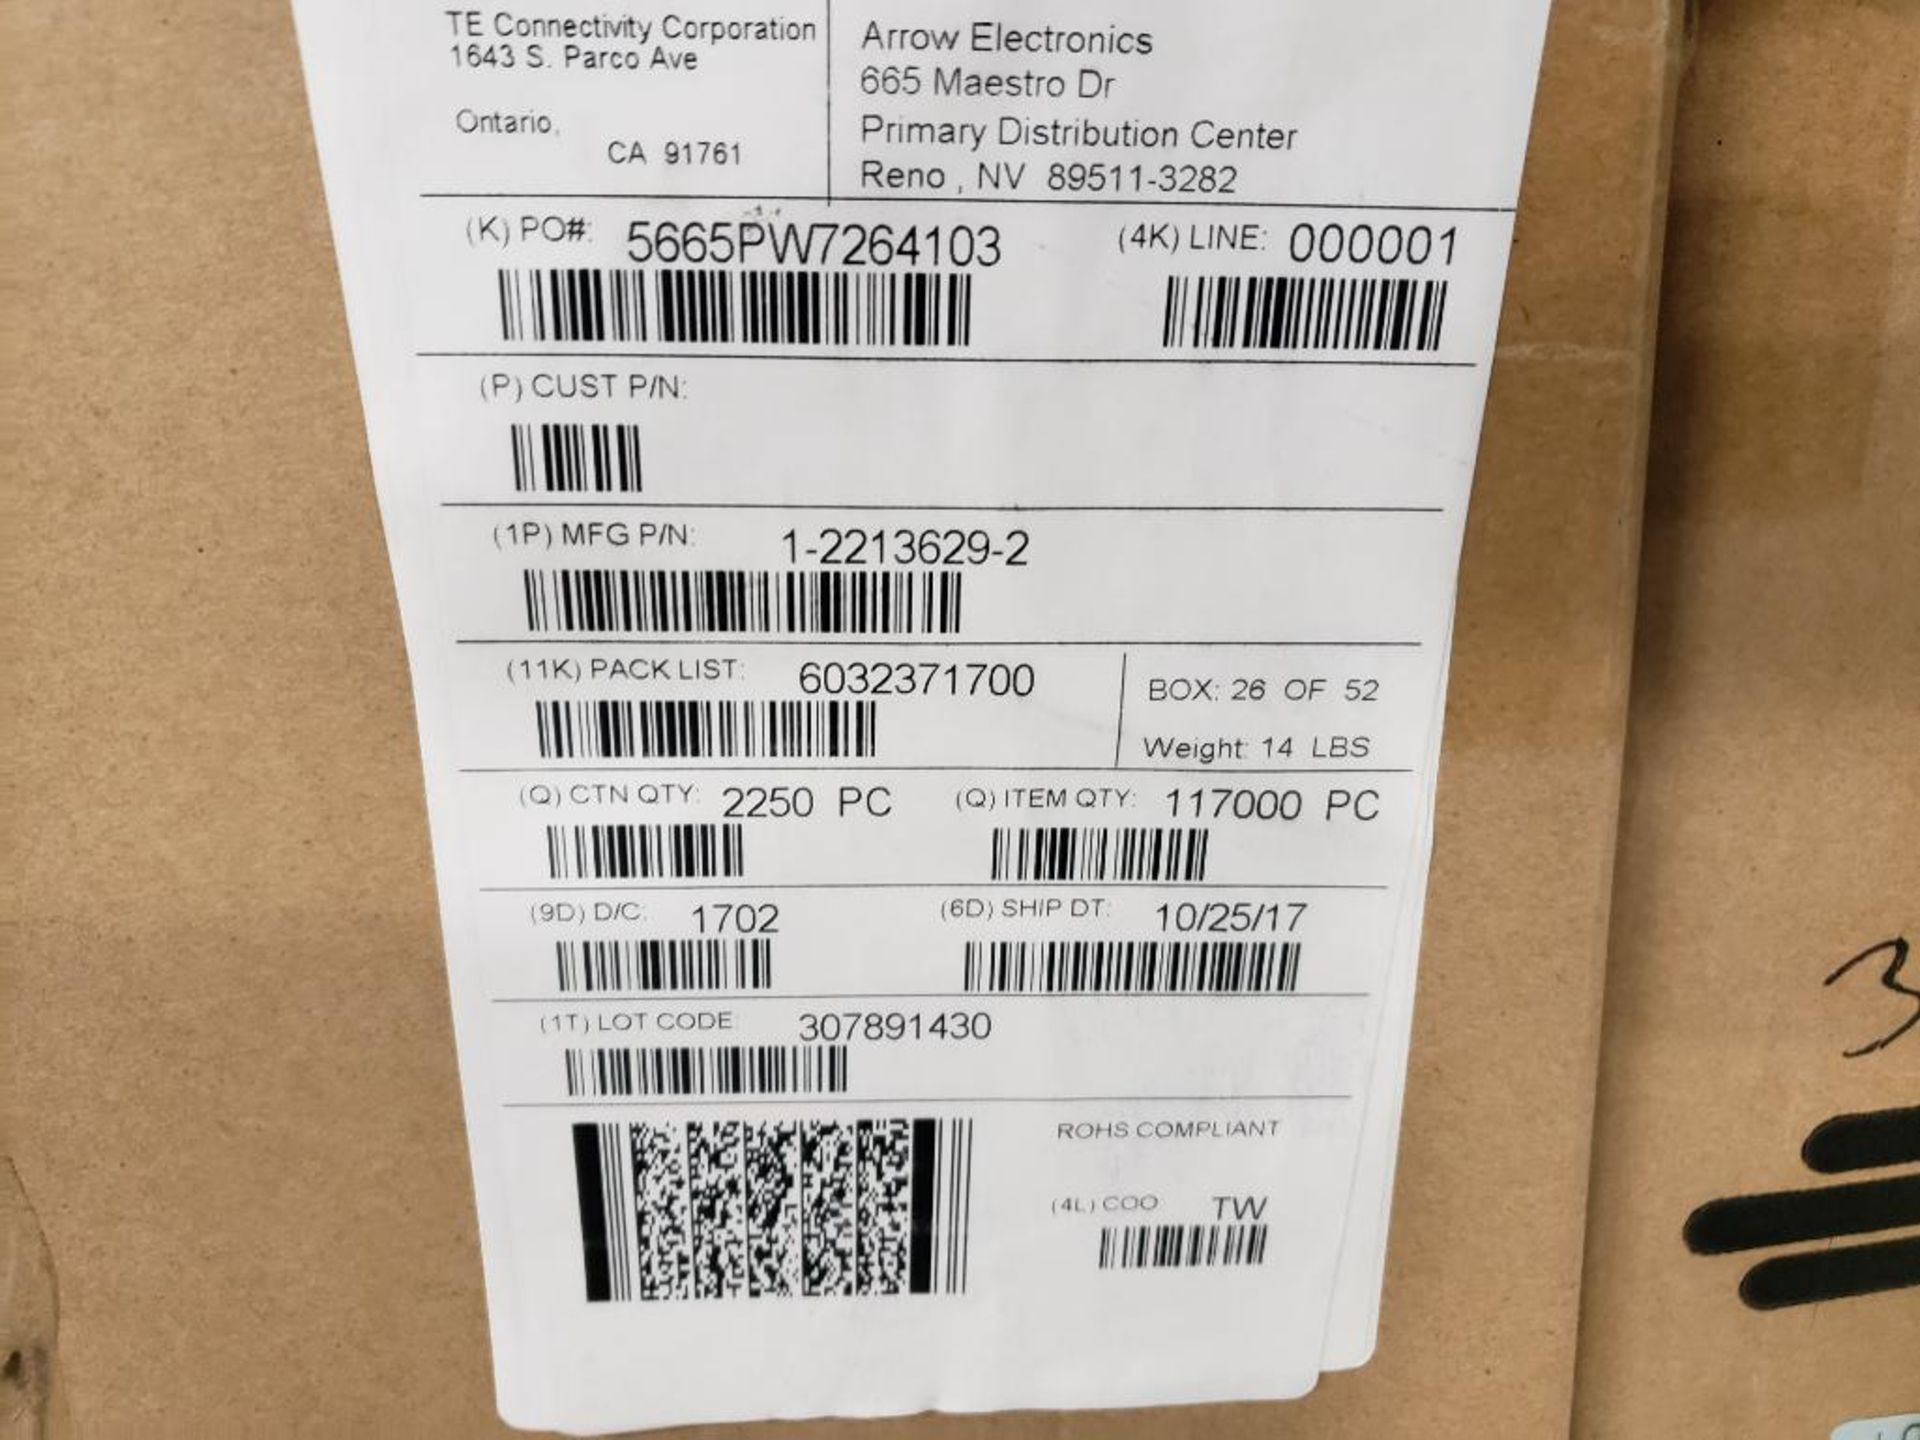 Qty 9000 - TE Connectivity part number 2213629-2. (4 bulk boxes of 9 reels) - Image 10 of 12